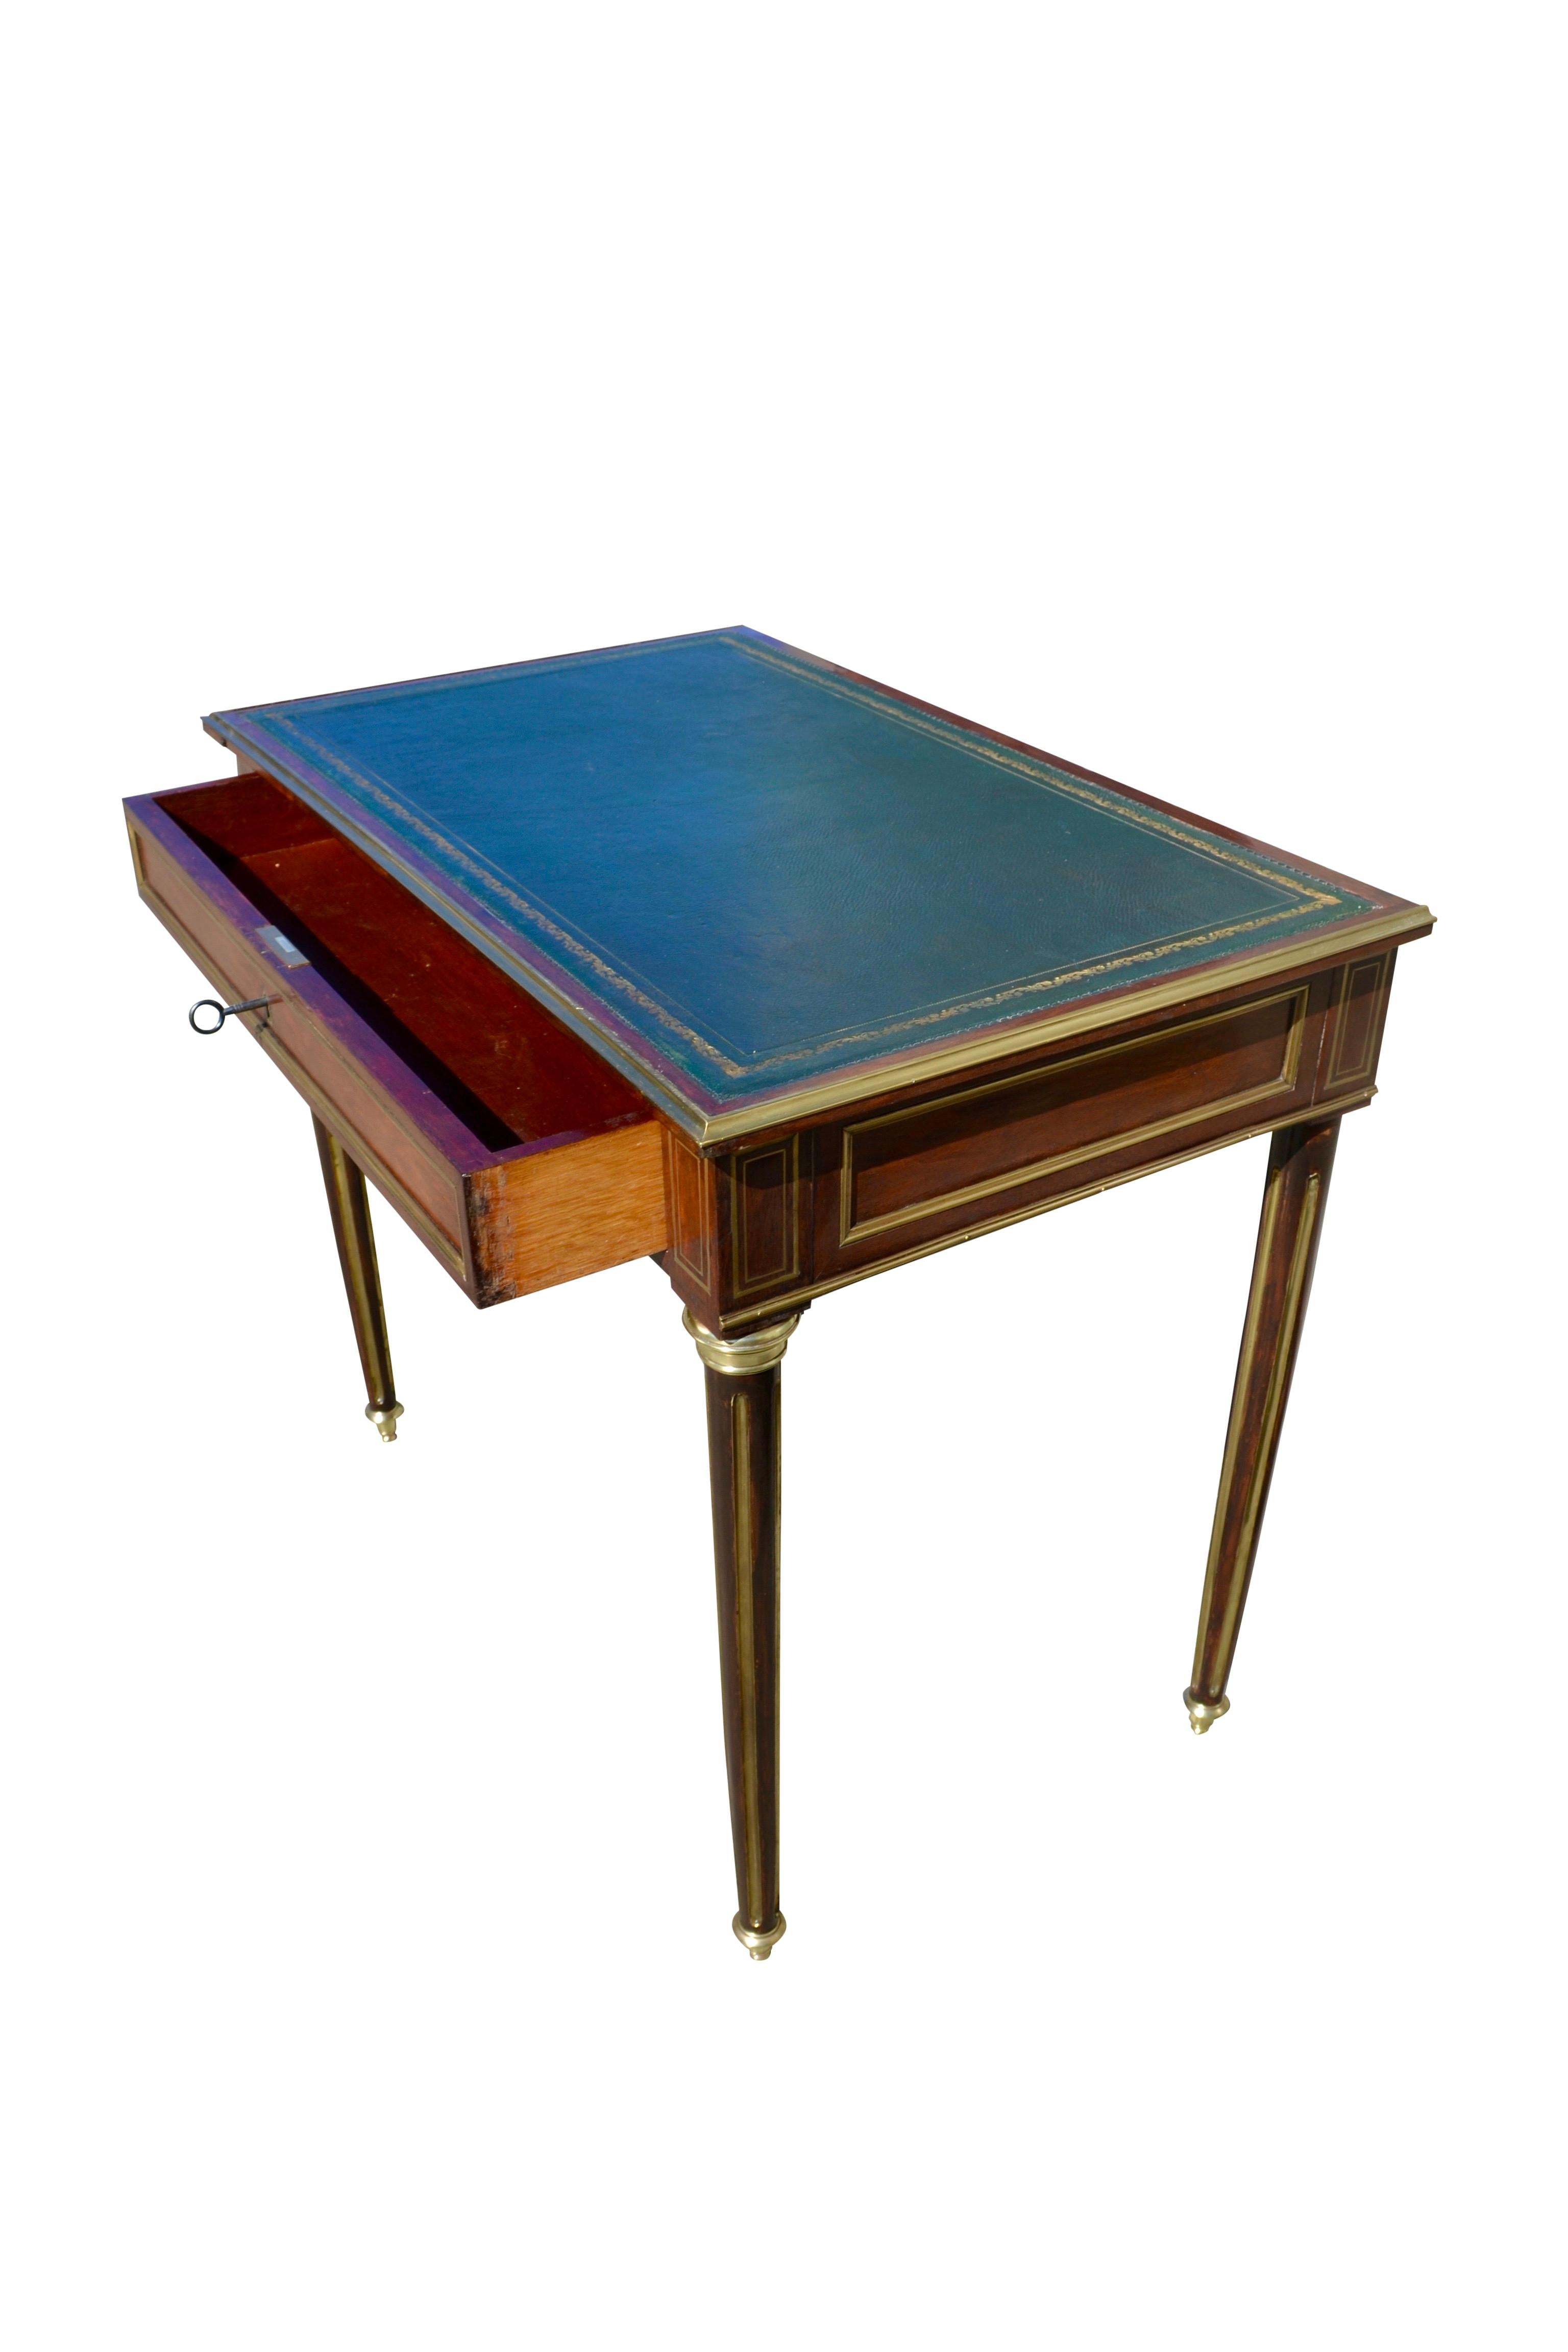 French Late 19thc Louis XVI Style Mahogany Brass Trimmed Writing Desk/Console For Sale 4